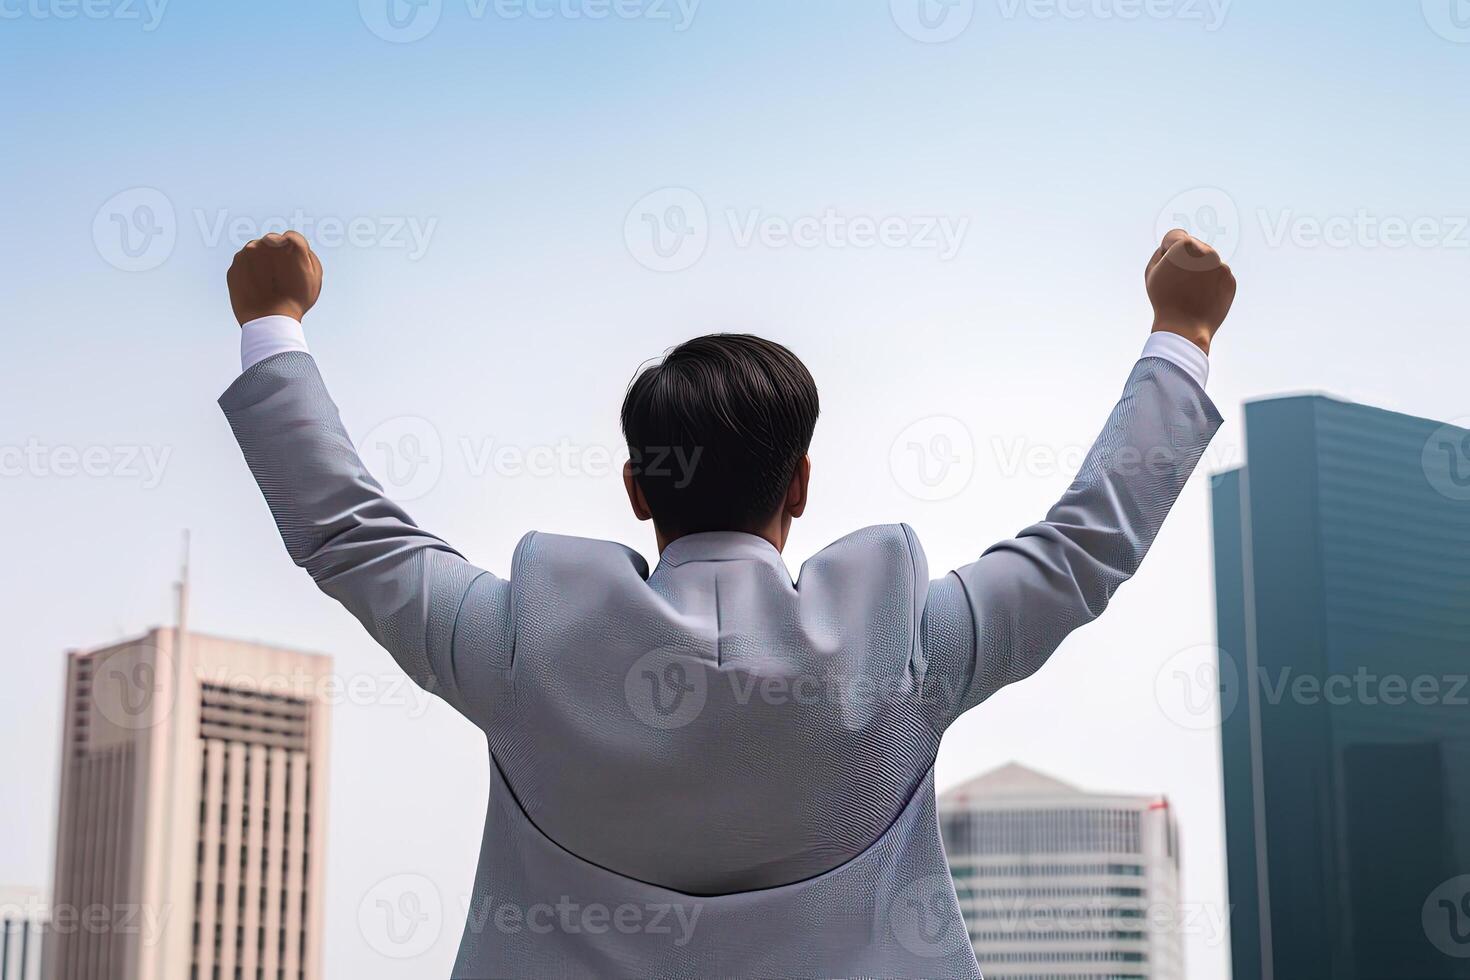 Successful businessman raising hand and expressing positivity while standing against skyscrapers background. photo